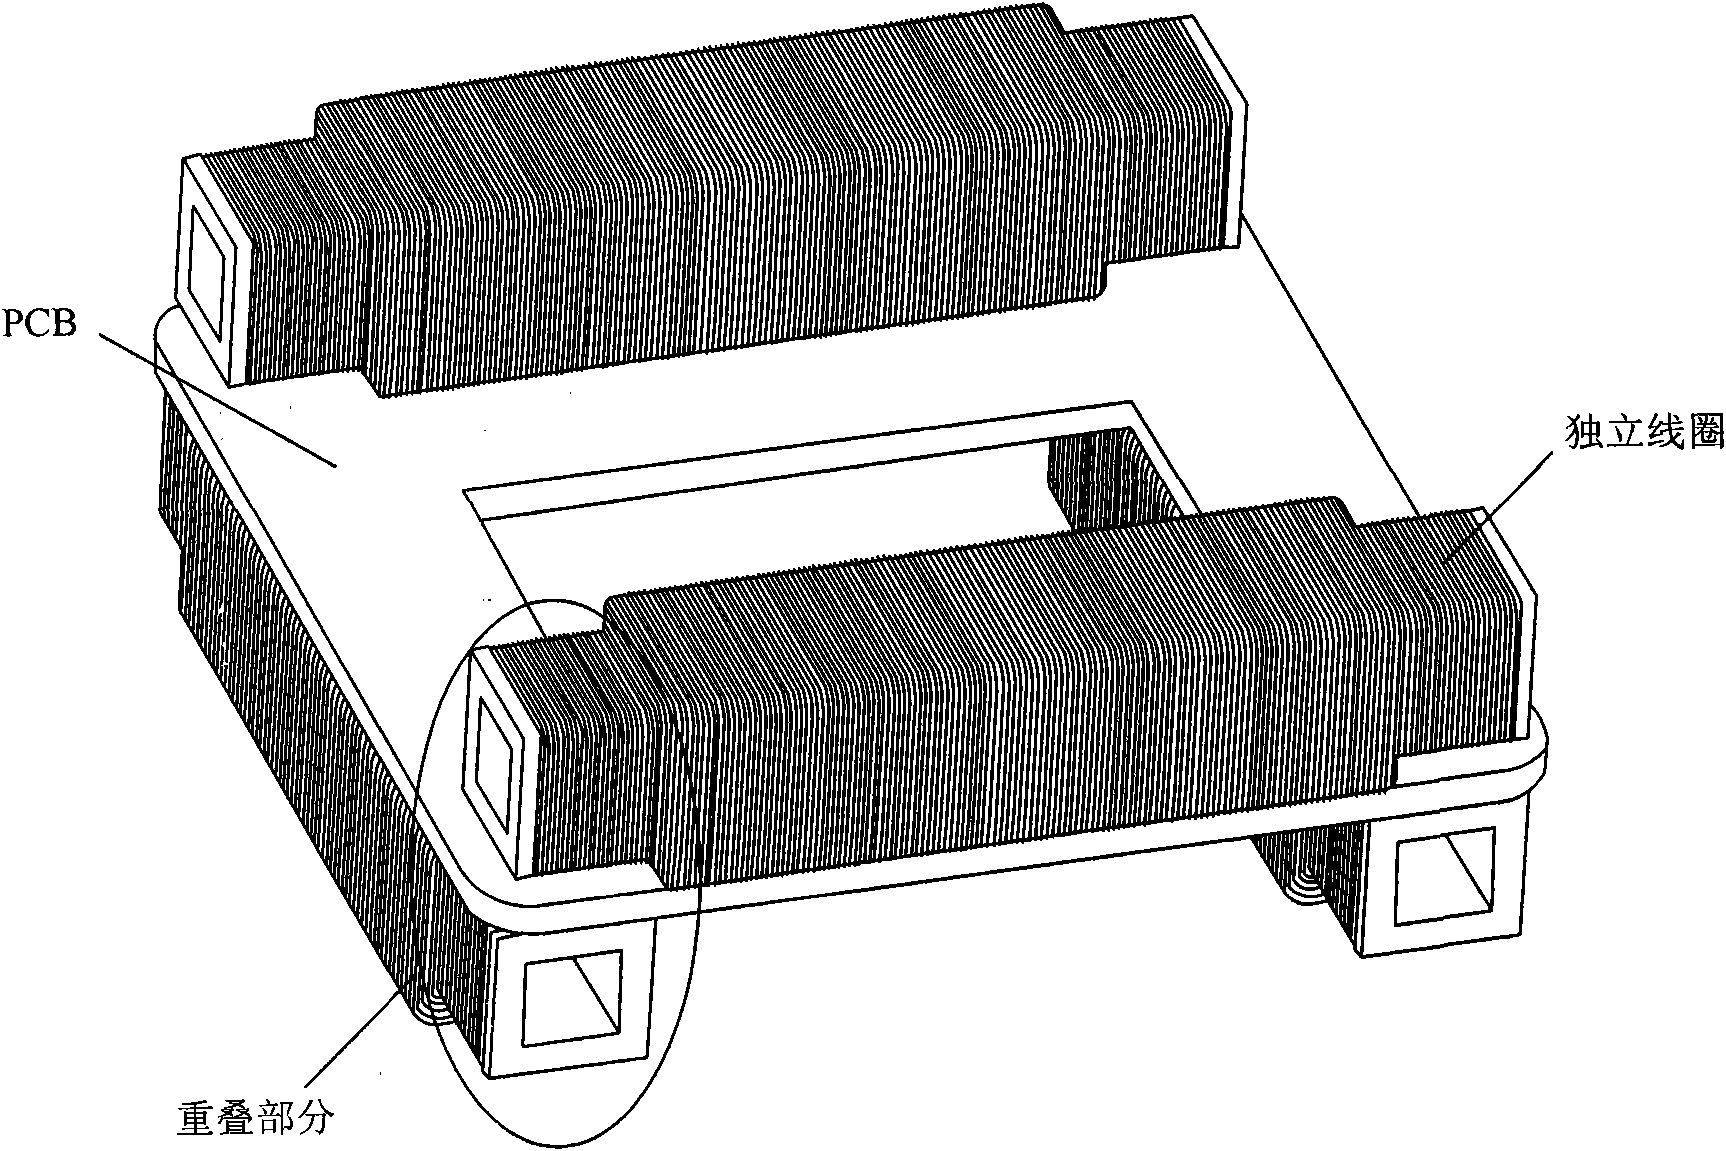 Mutual inductor in current transformer